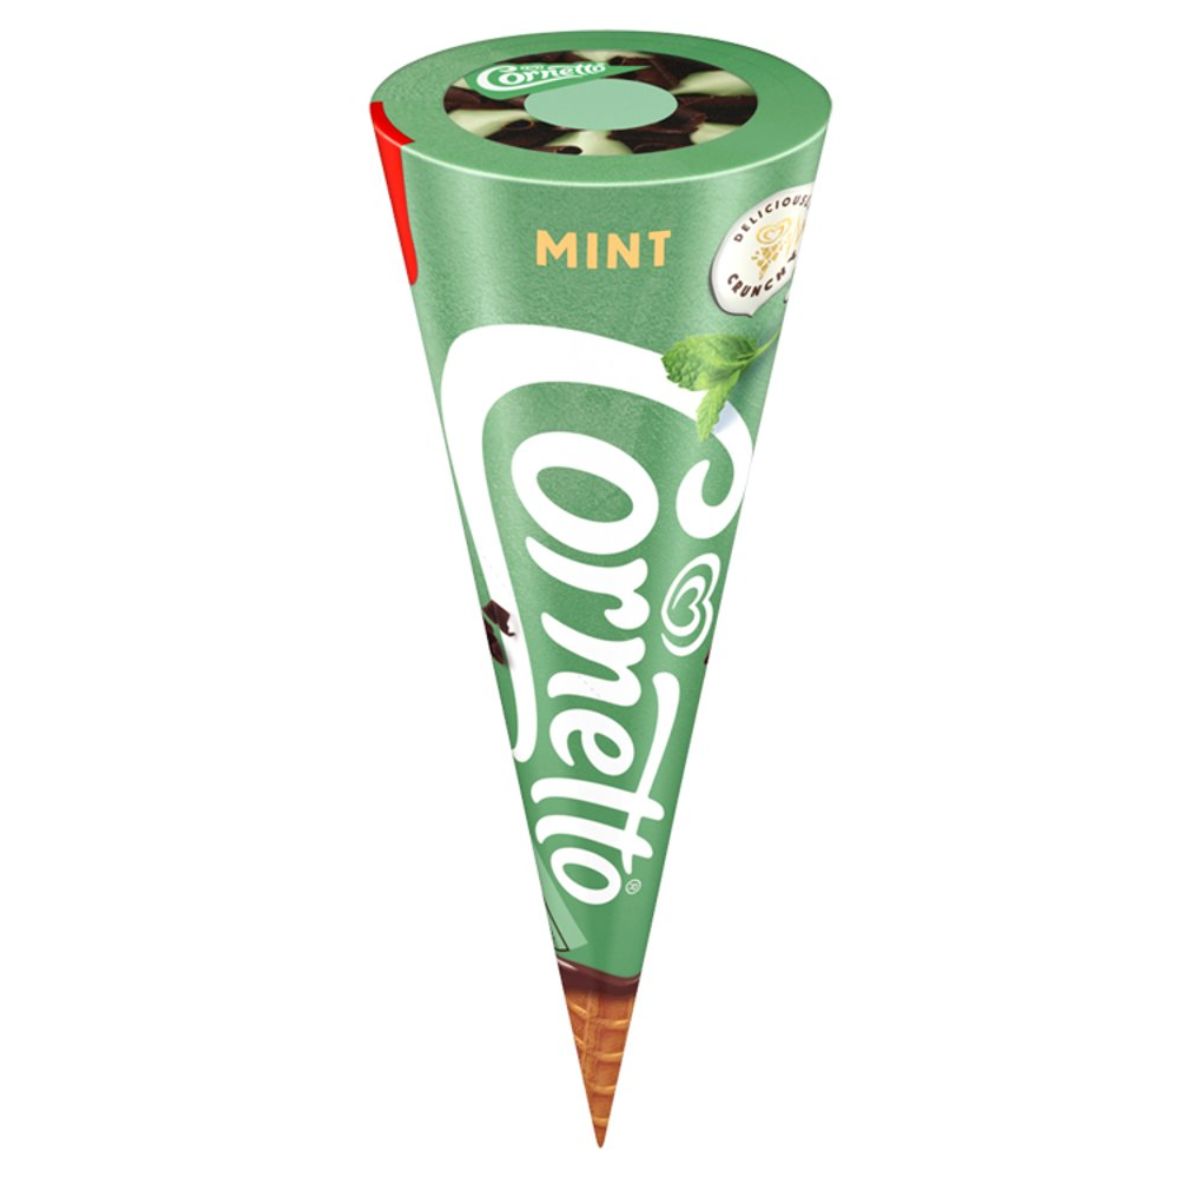 A Cornetto - Mint - 120ml of ice cream with a mint flavor.